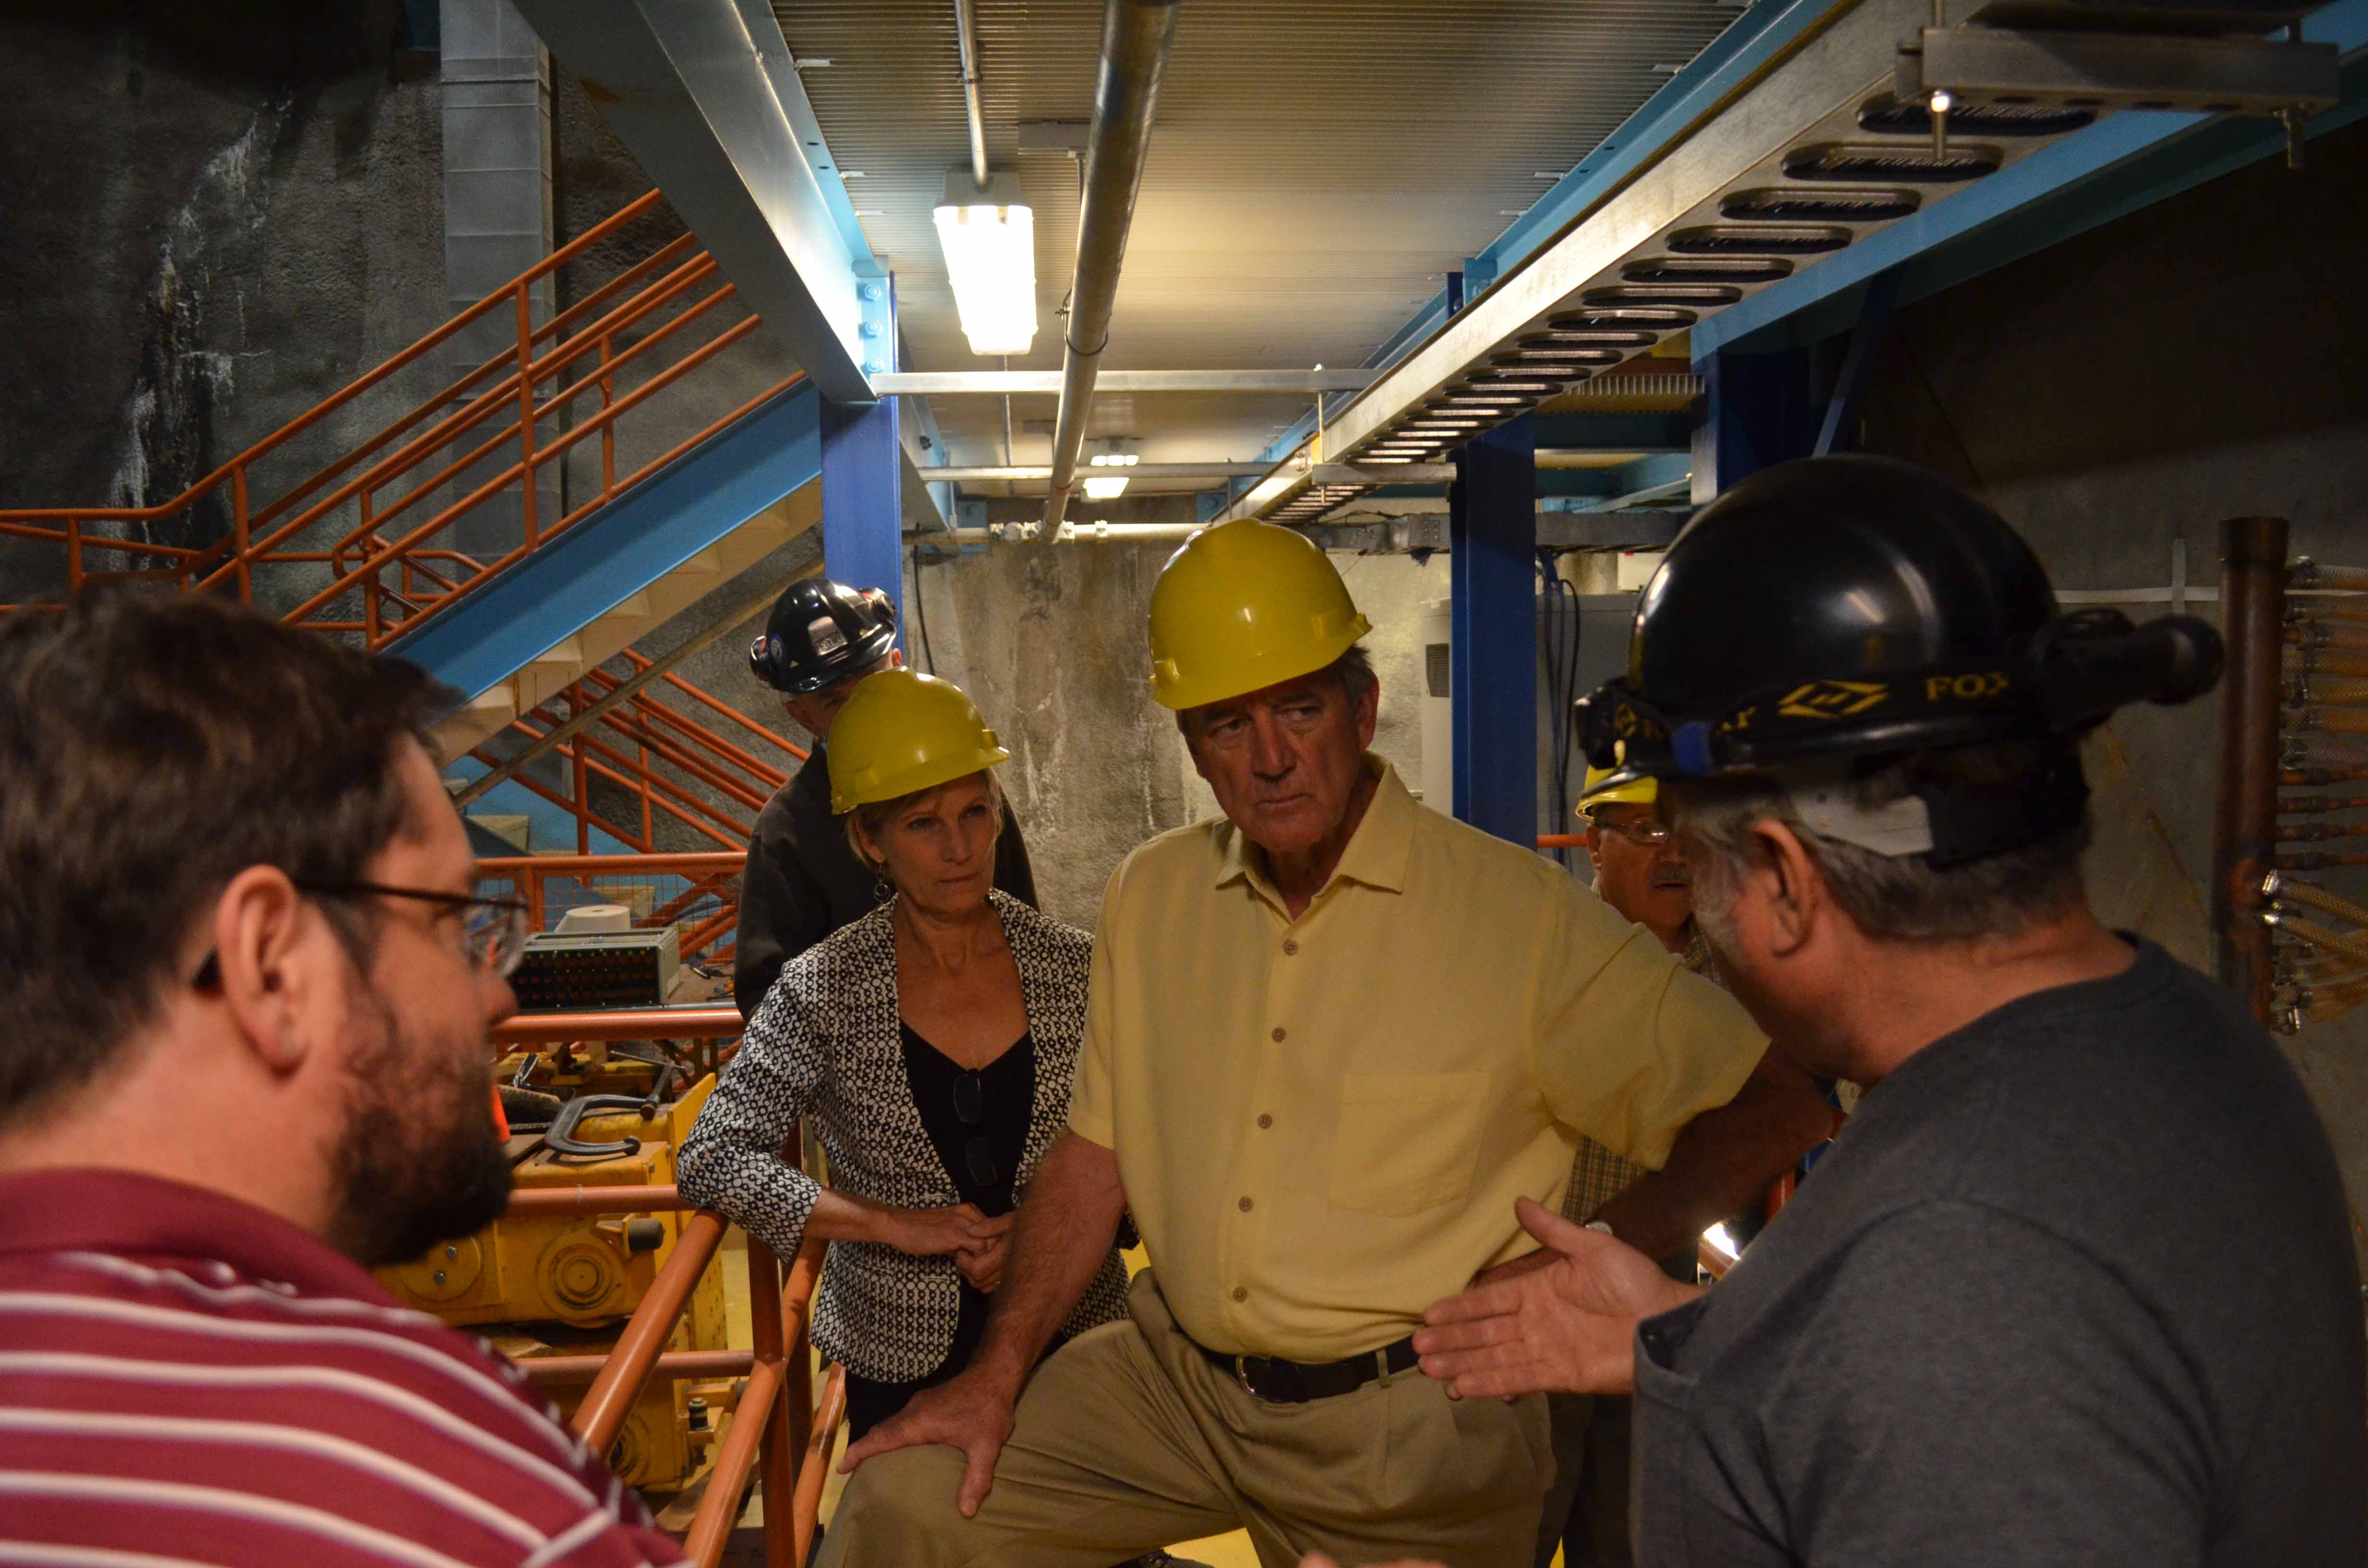 Rick and Mary tour the Soudan Underground Lab